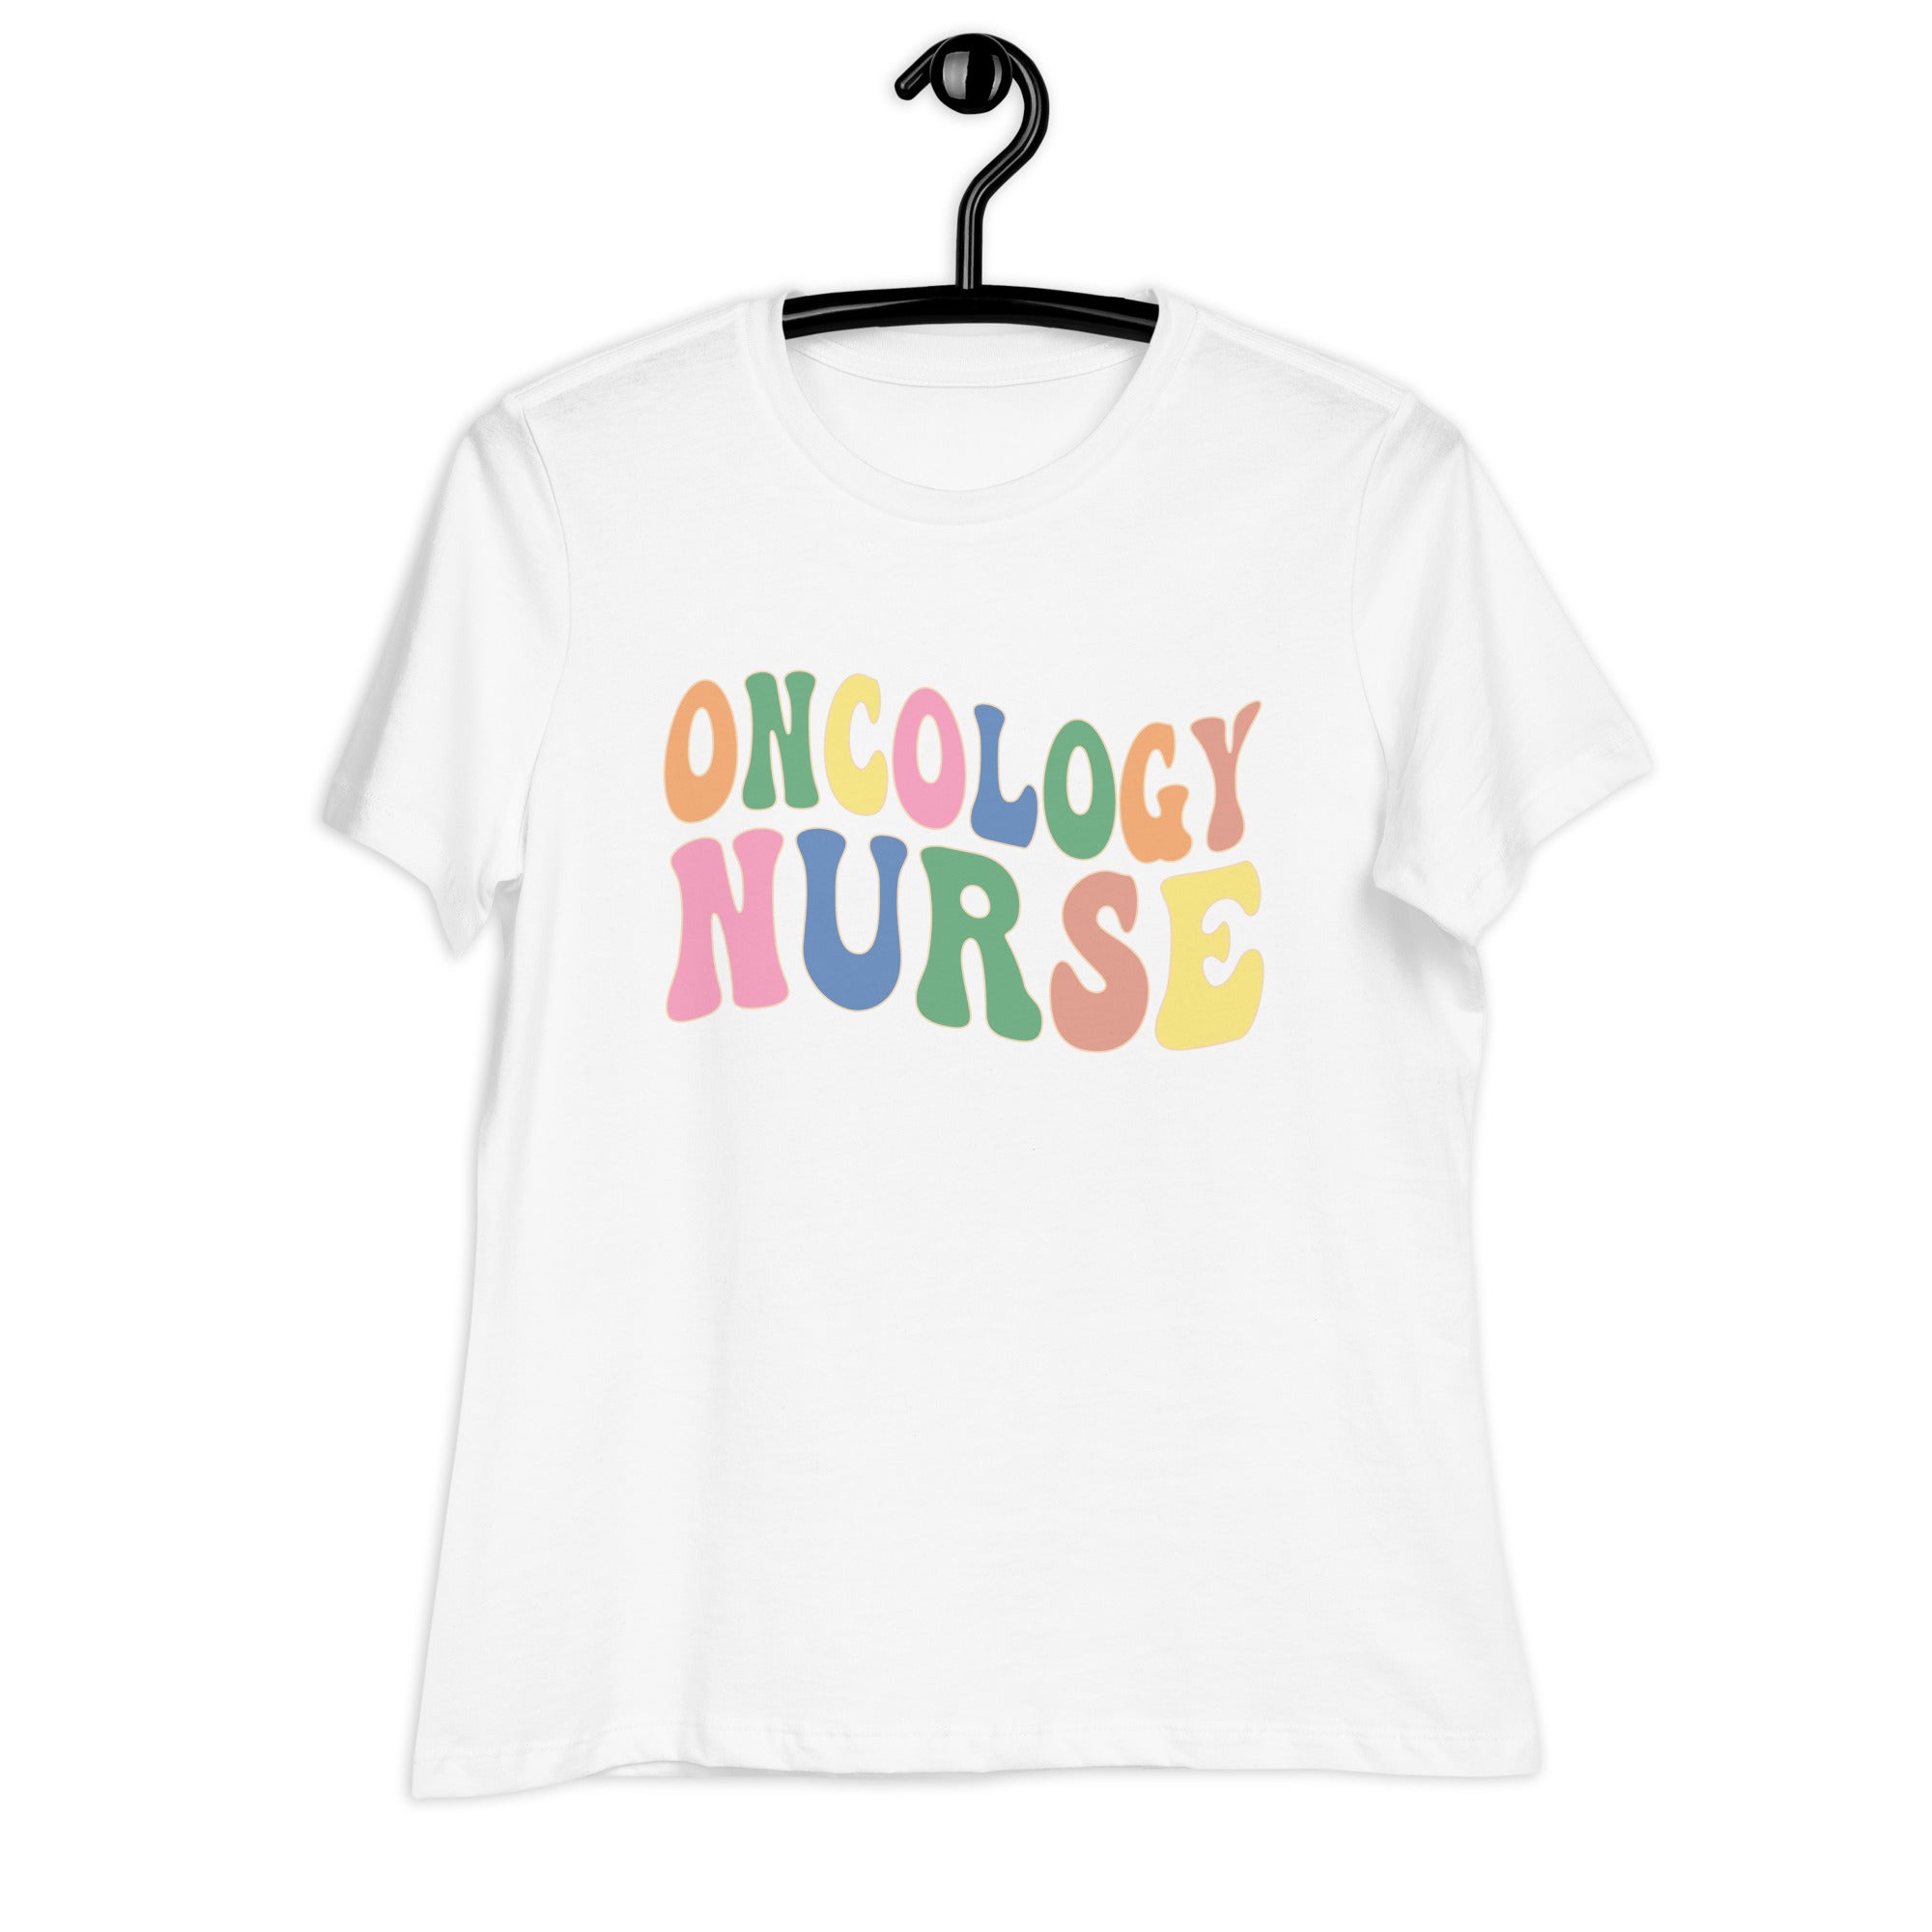 Oncology Nurse Women's Relaxed T-Shirt